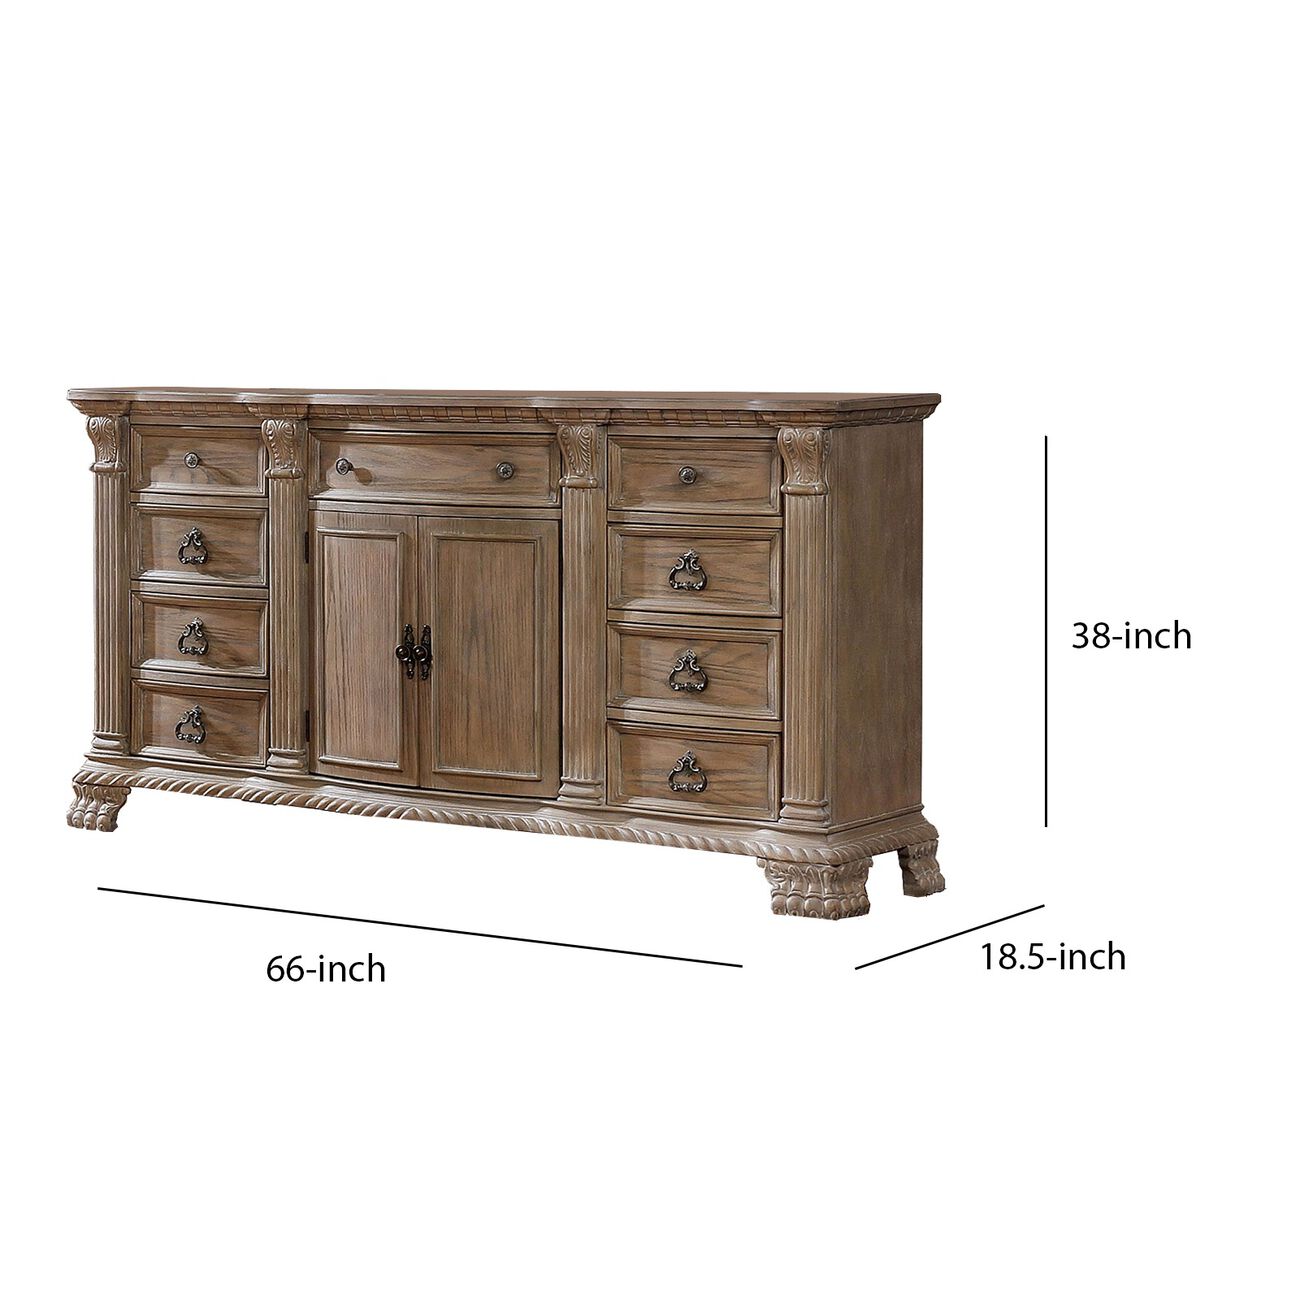 Traditional Style 9 Drawer Wooden Dresser with Door Cabinet, Brown